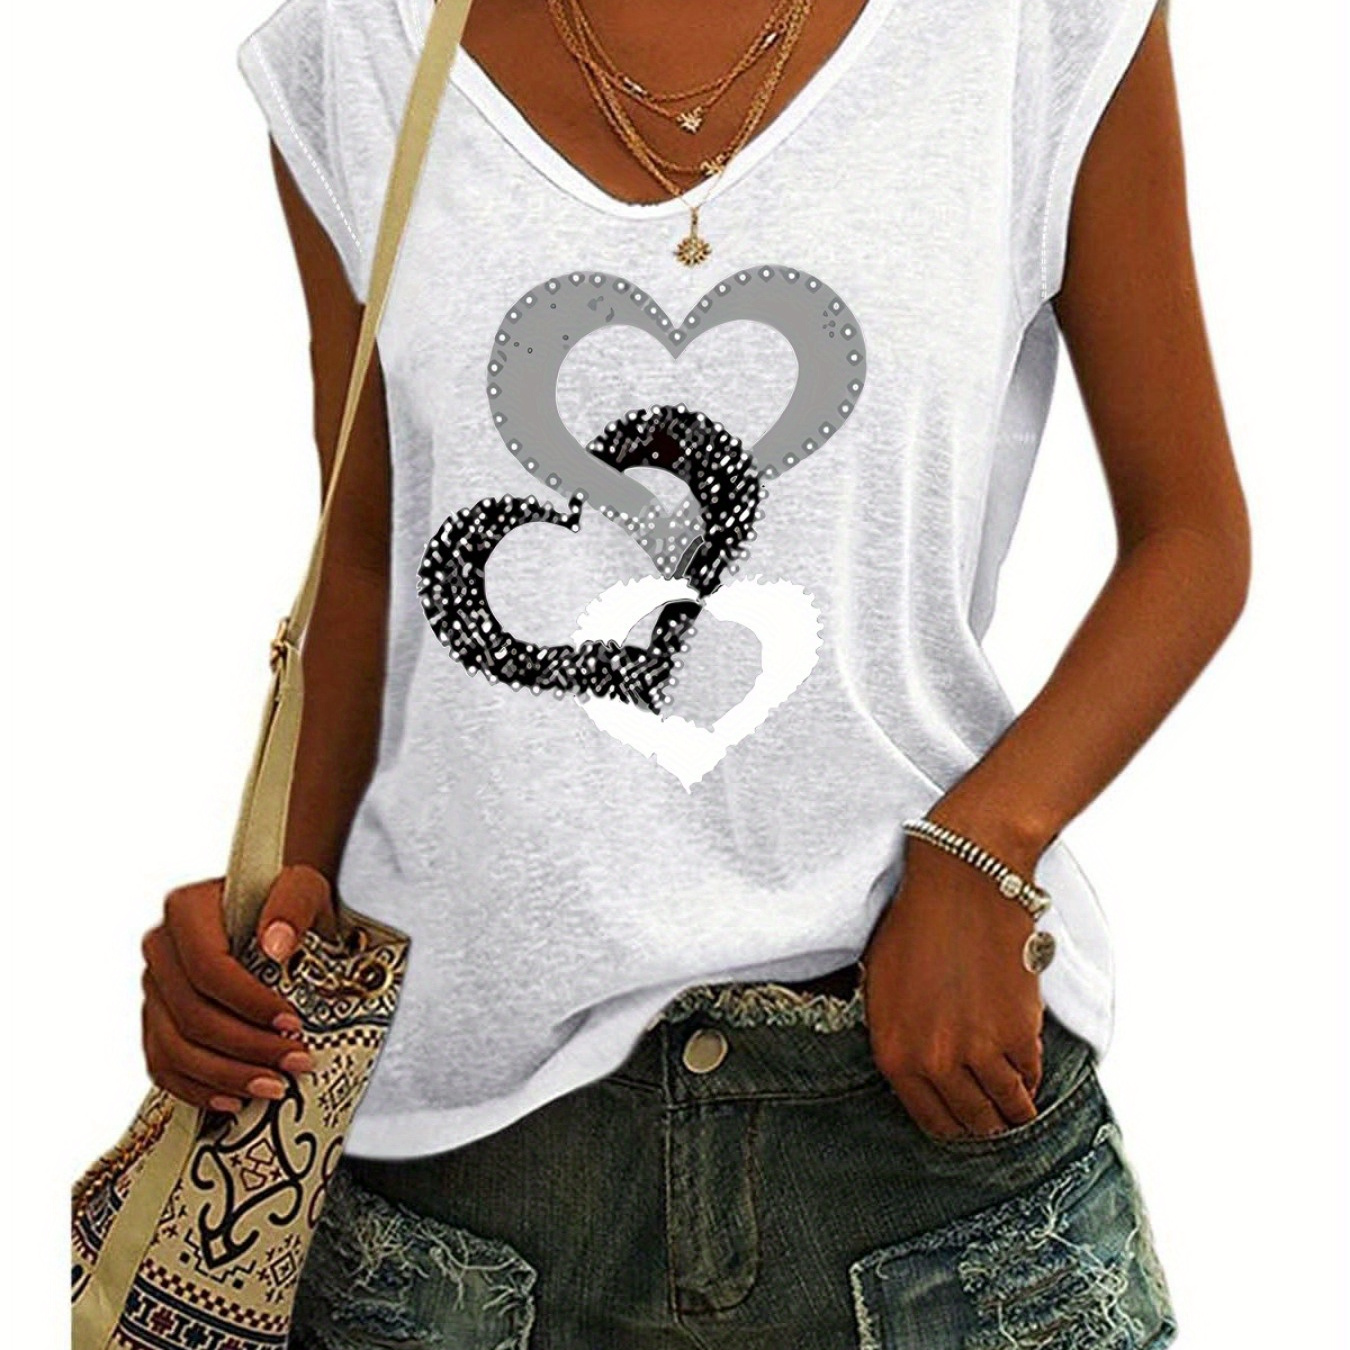 

Hearts Graphic Print Tank Top, Sleeveless Casual Top For Summer & Spring, Women's Clothing